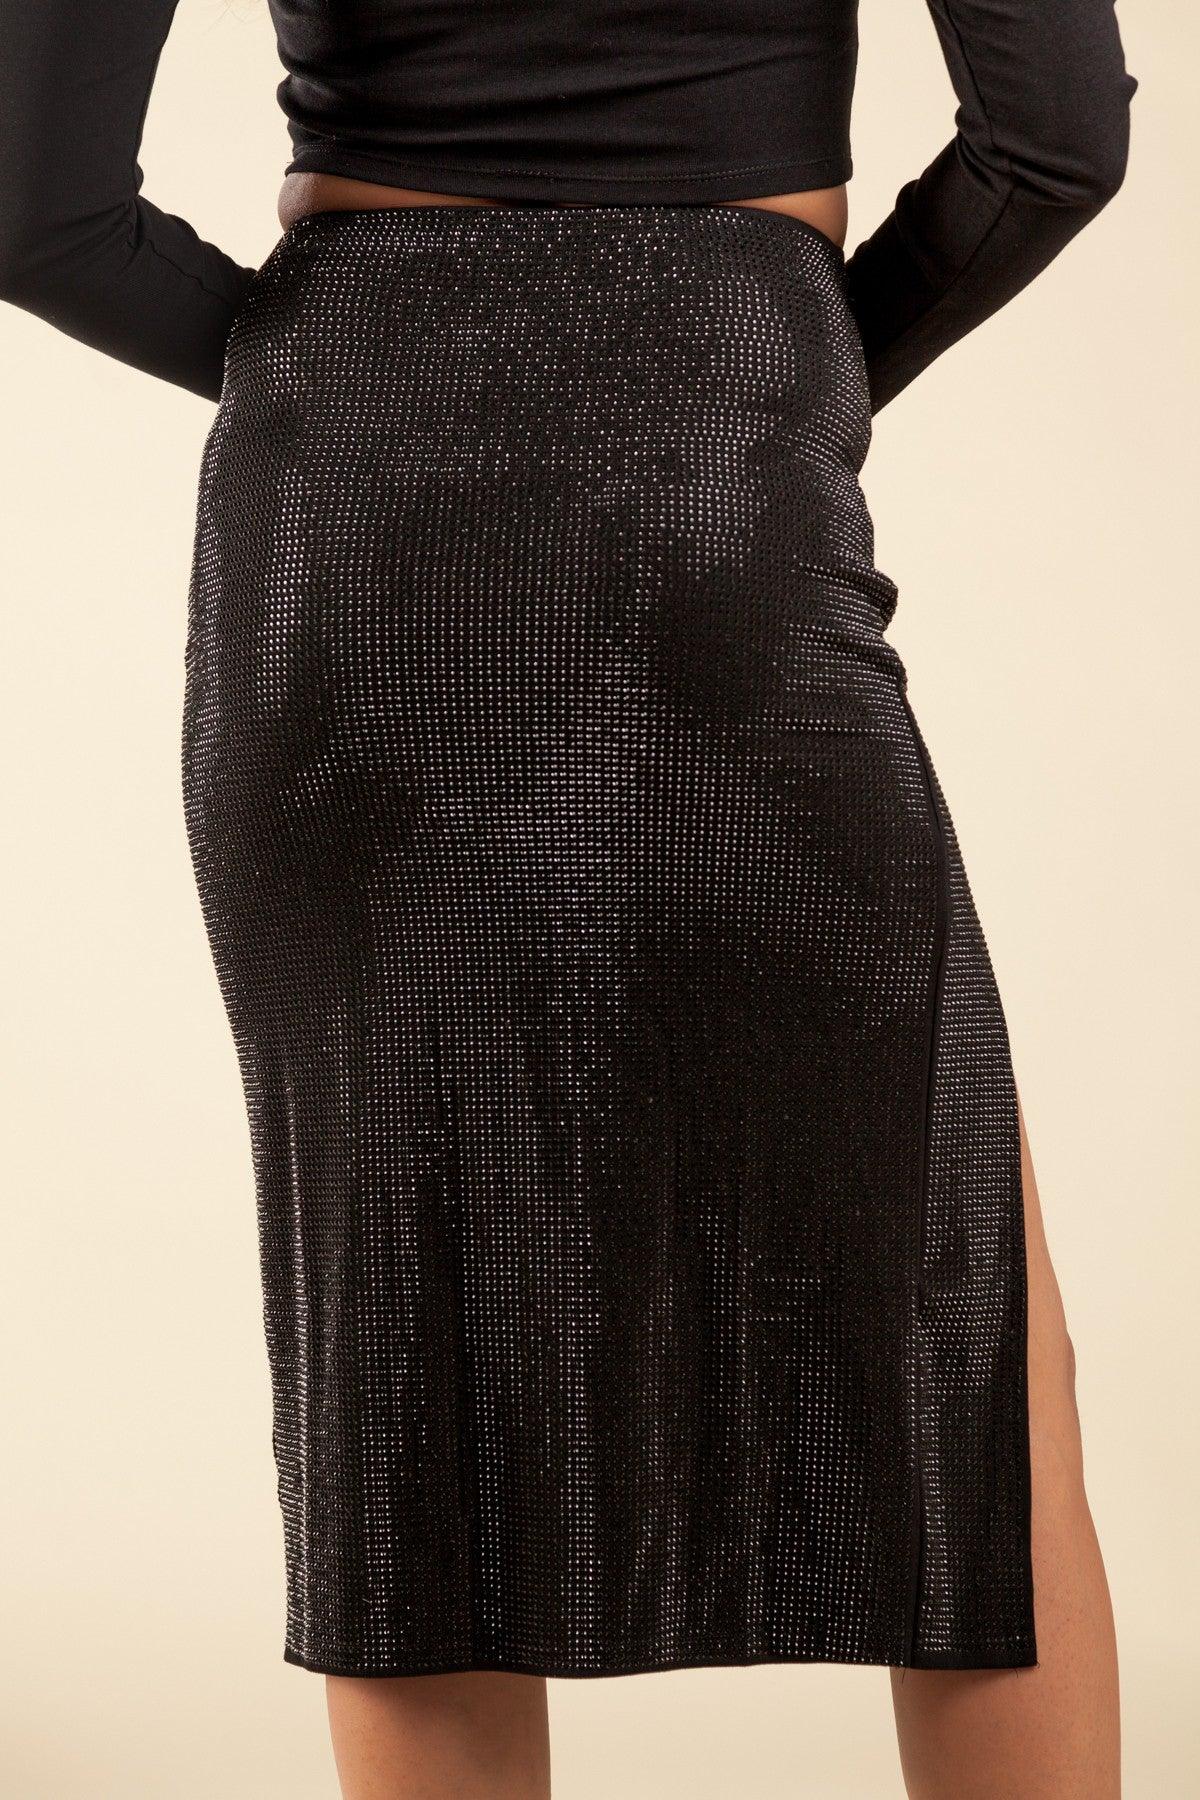 high waisted studded skirt w/side slit - RK Collections Boutique